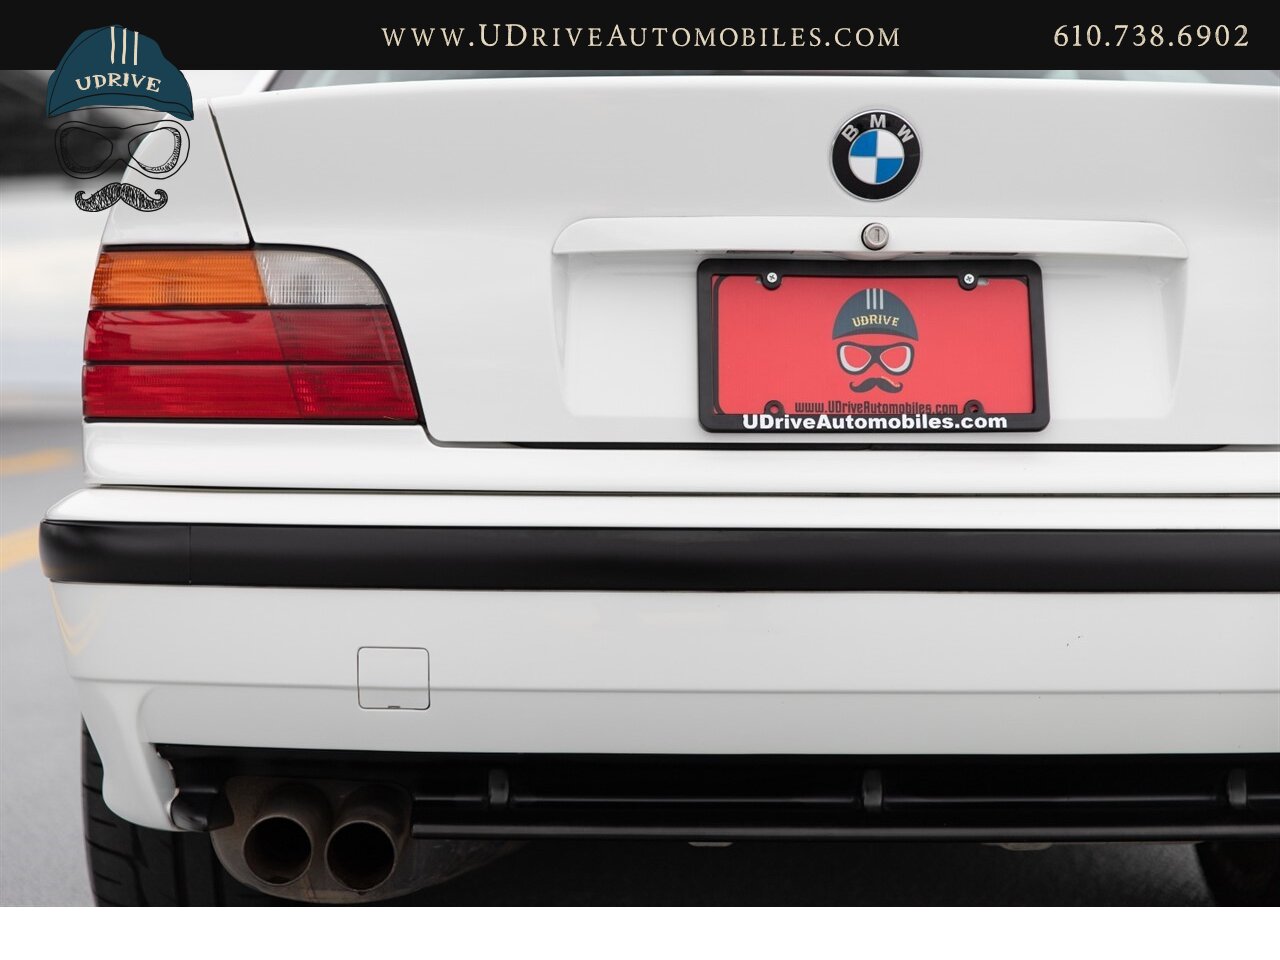 1995 BMW M3 E36 Alpine White over Black Vader Seats  5 Speed - Photo 20 - West Chester, PA 19382